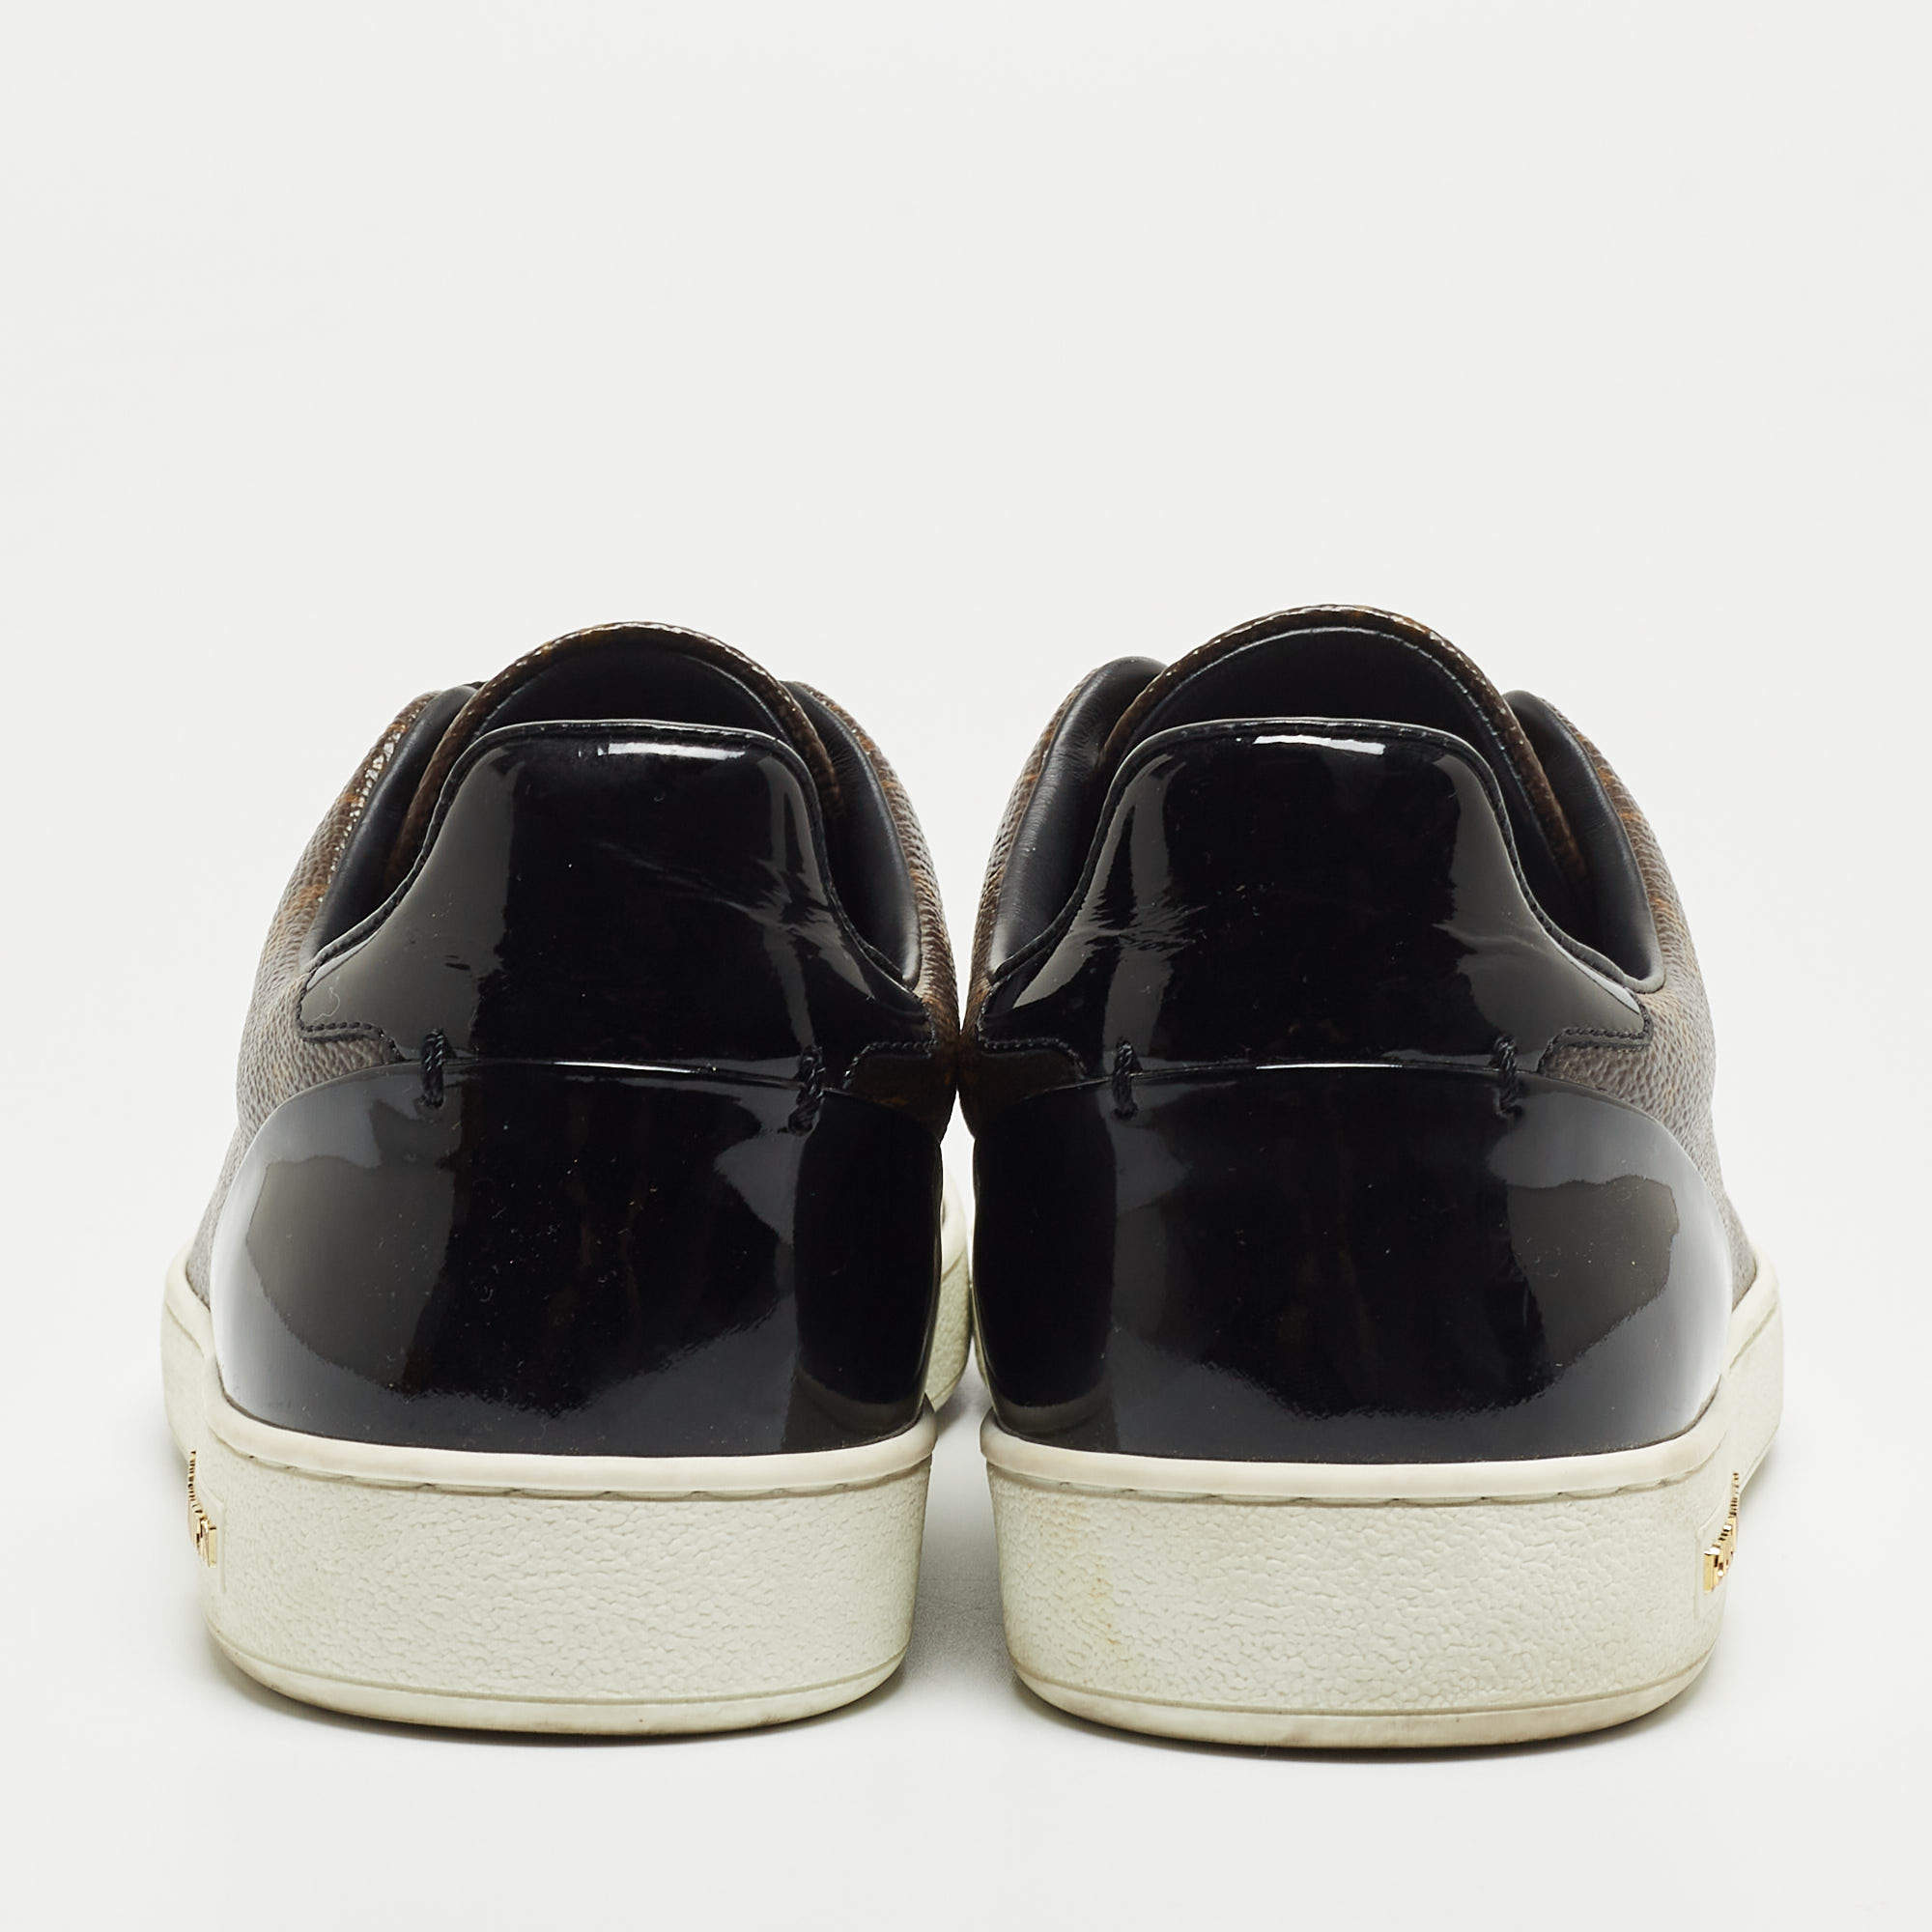 Louis Vuitton Frontrow Sneakers - Brown Sneakers, Shoes - LOU809884